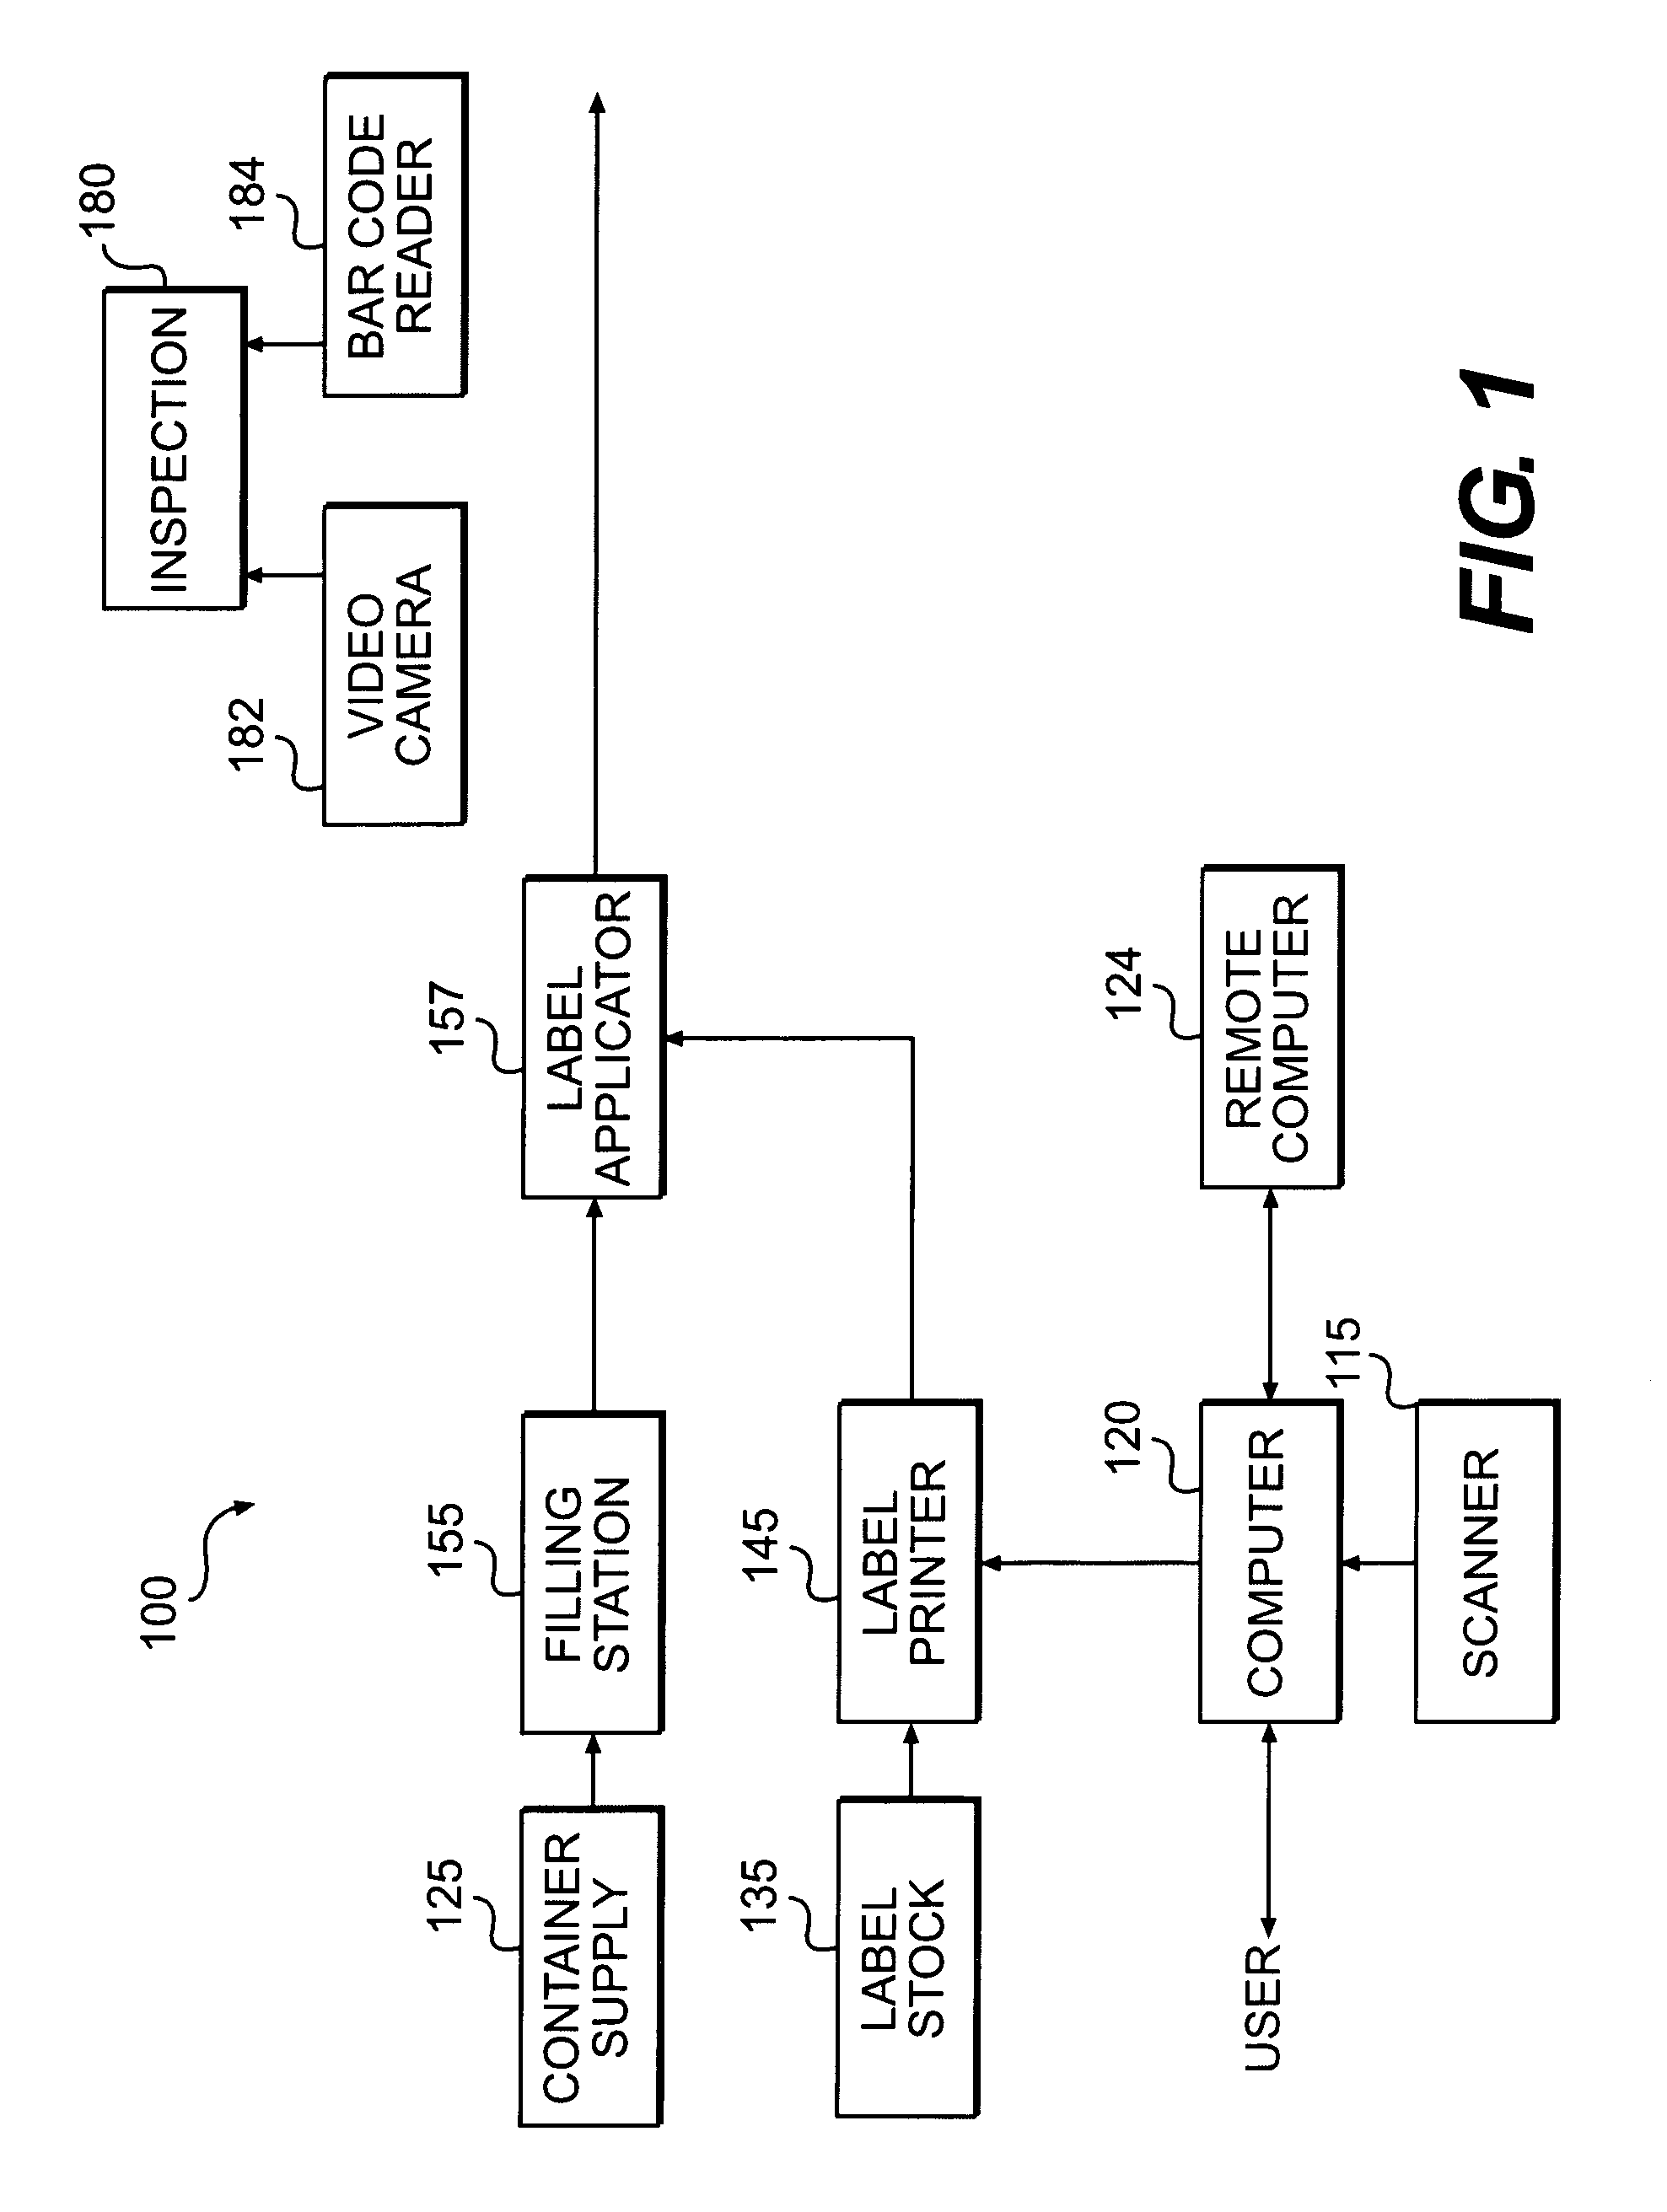 Method and apparatus for applying bar code information to products during production